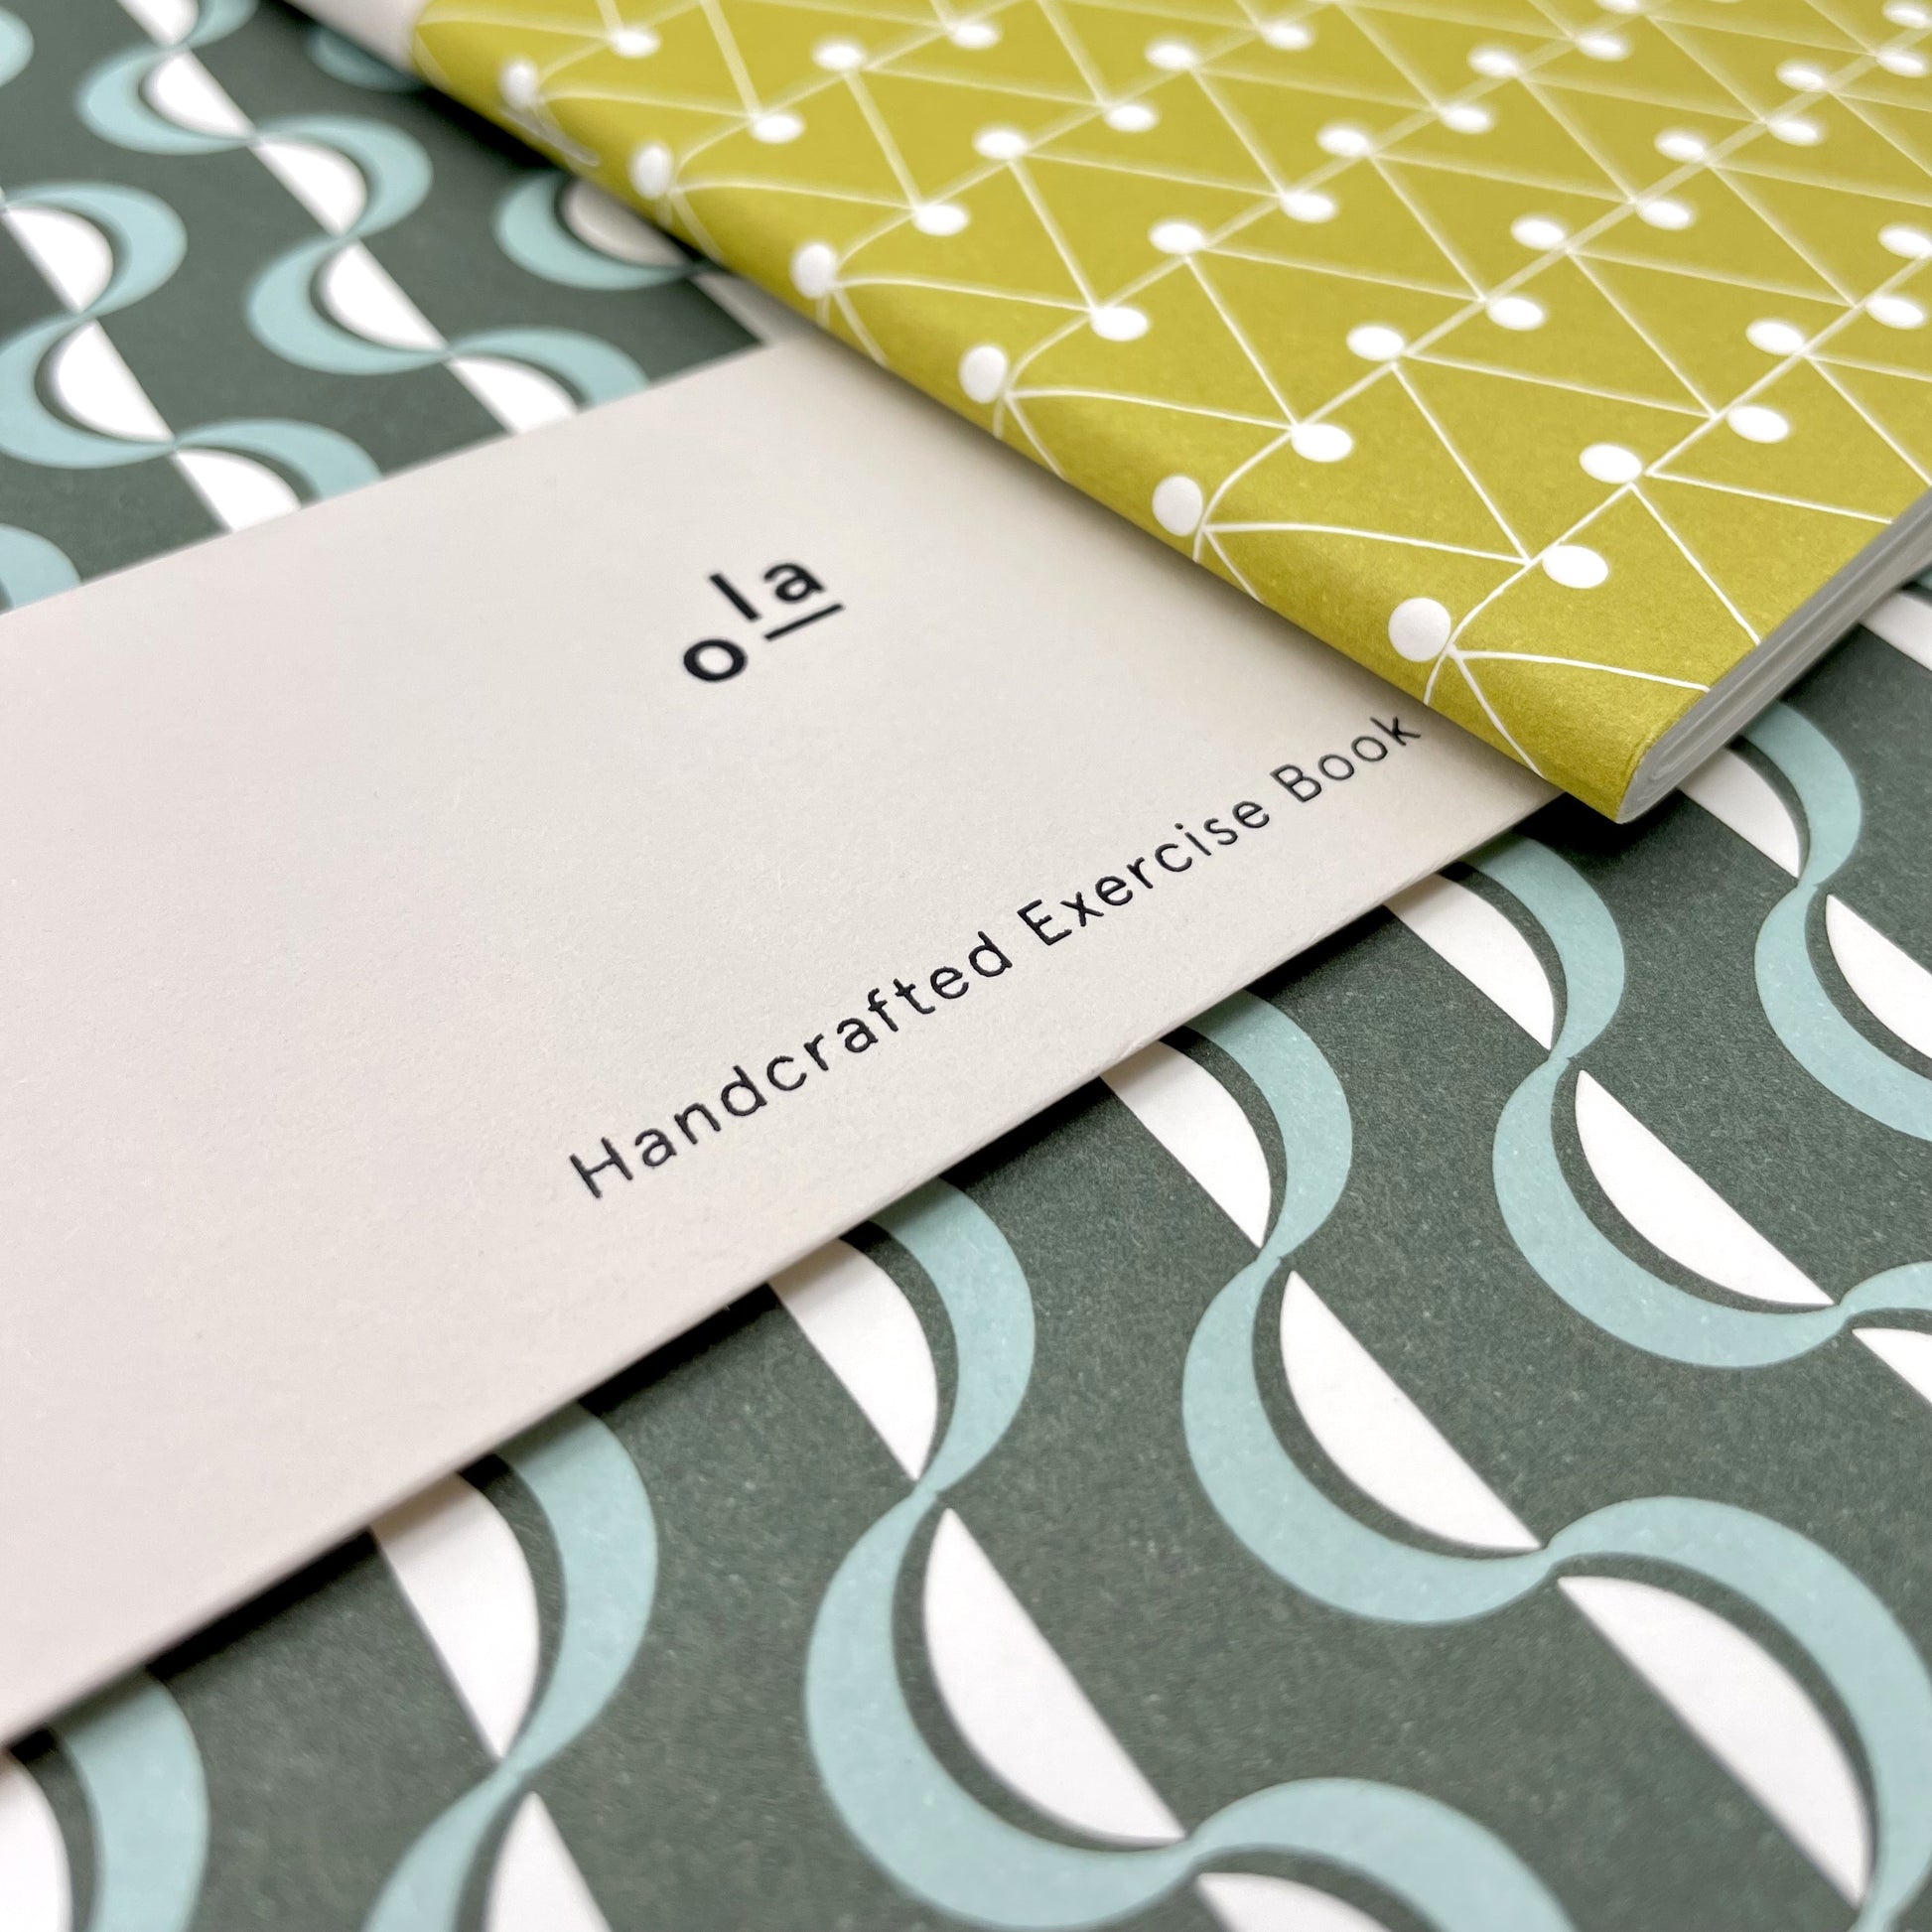 slimline softcover exercise book by Ola Studio, with plain pages. Front cover is a wavy stripe design in dark green and aqua on white. Pictured with branded presentation band, close-up